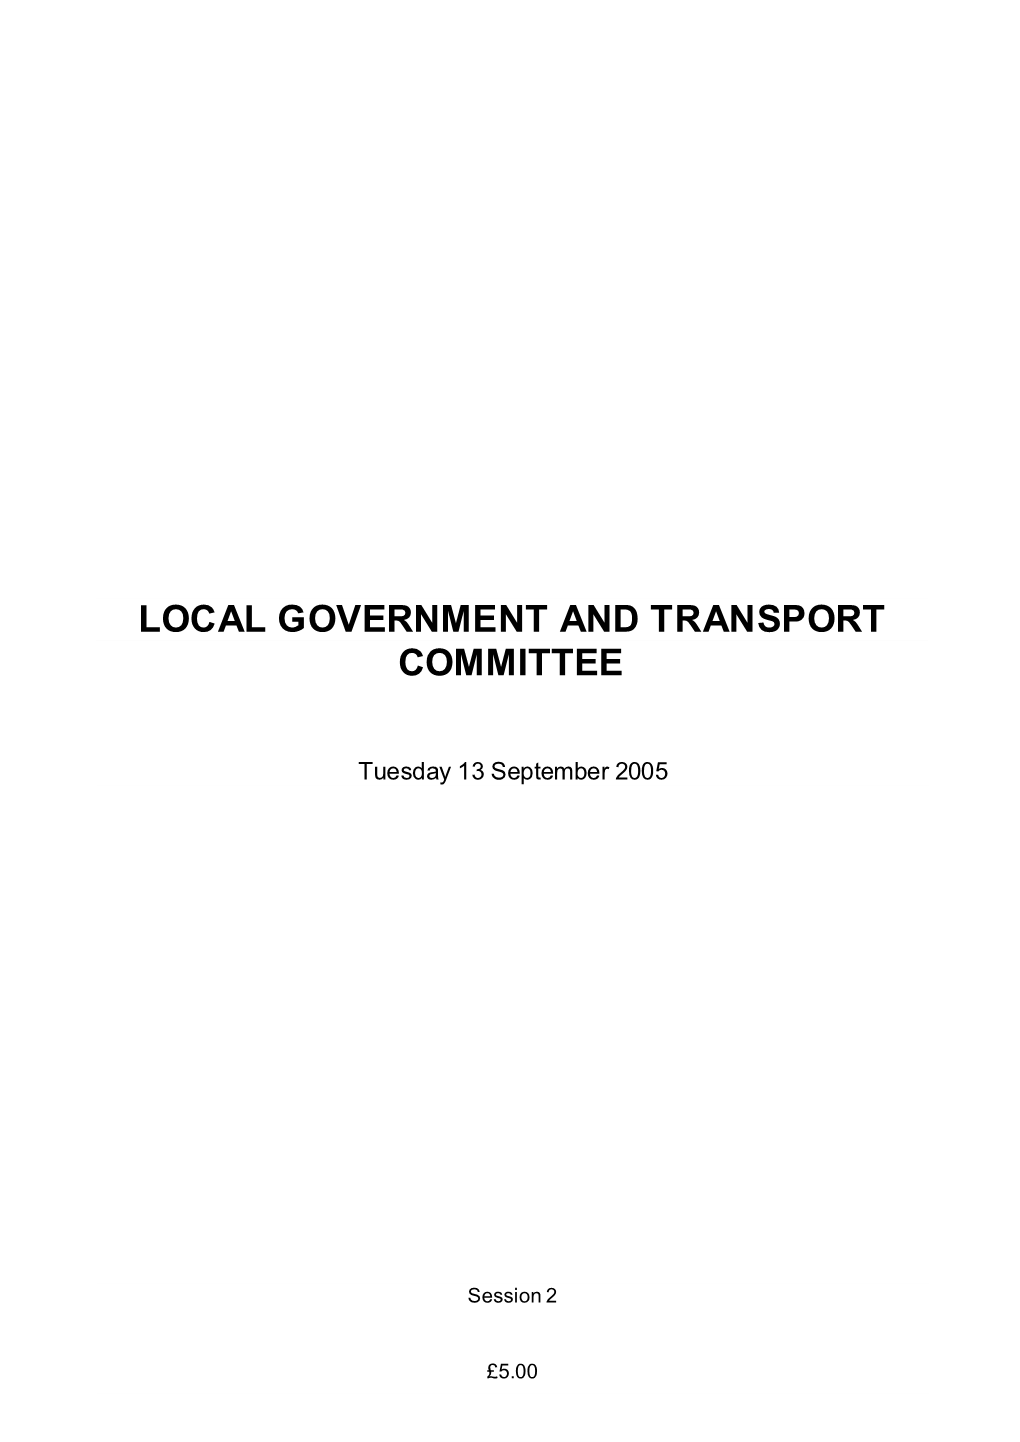 Local Government and Transport Committee